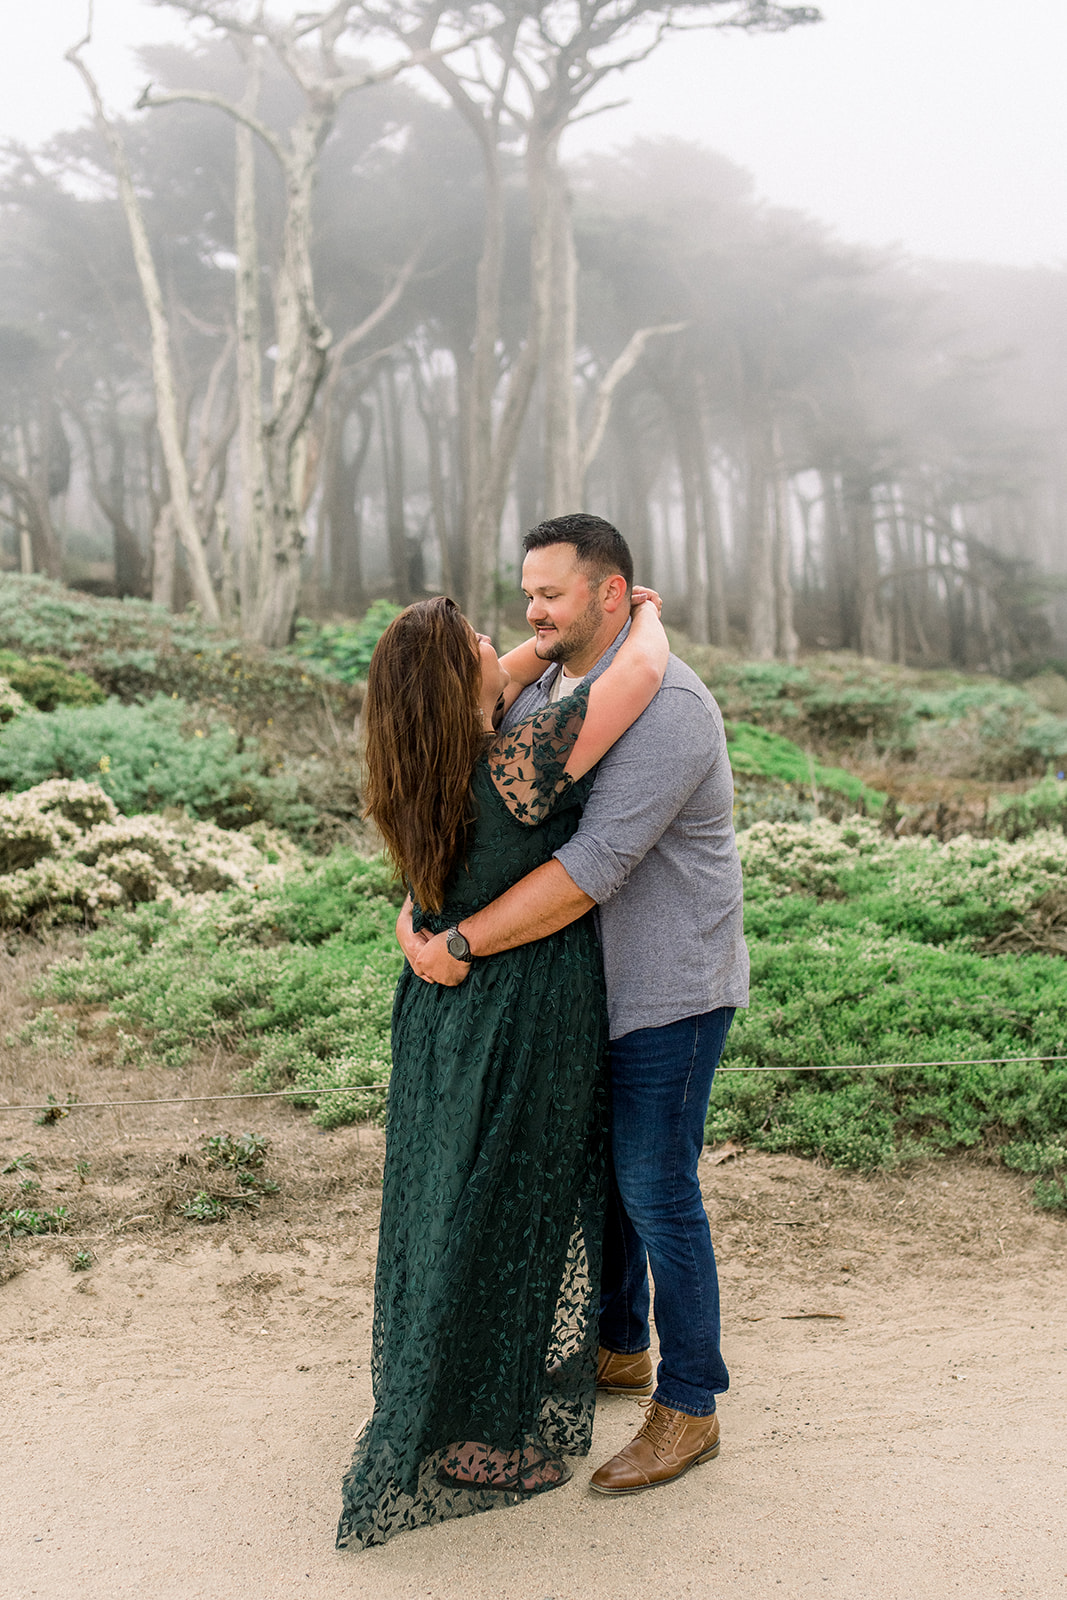 A couple celebrates their engagement in the Cypress trees in fog at Lands End San Francisco CA.